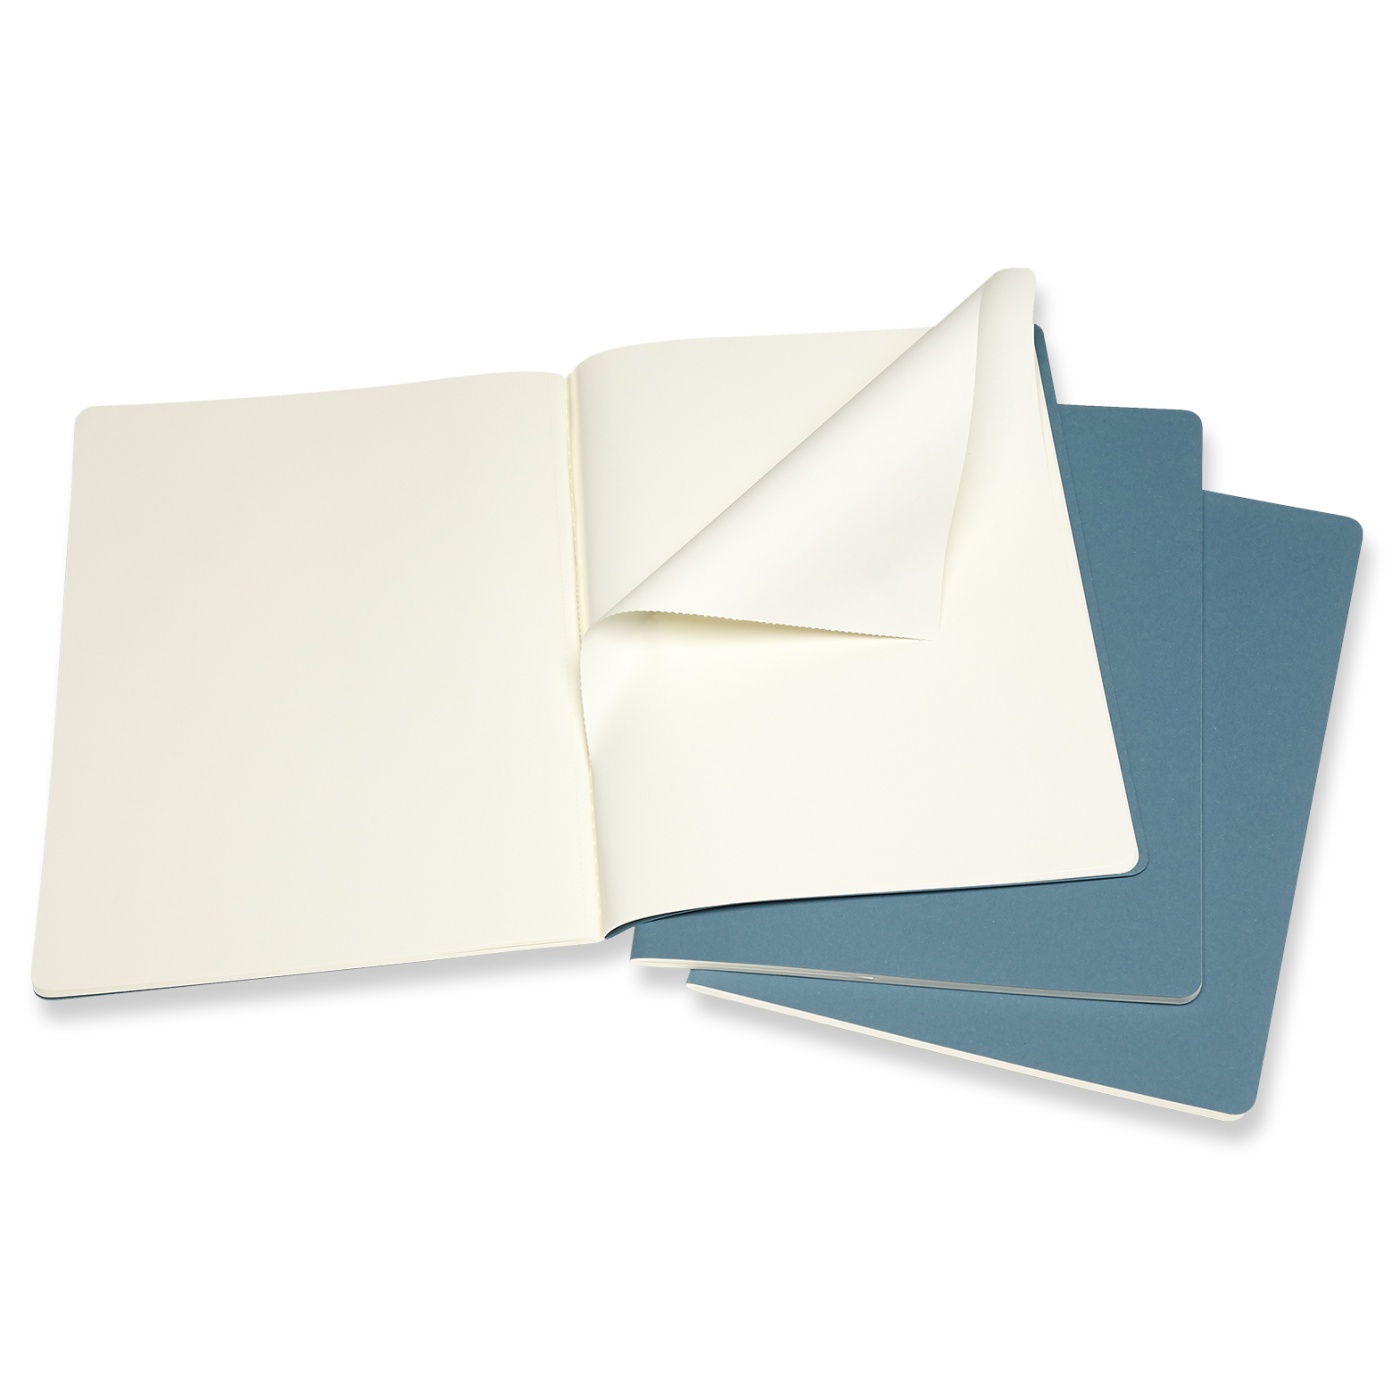 Cahier XL Brisk Blue Plain in the group Paper & Pads / Note & Memo / Writing & Memo Pads at Pen Store (100331)